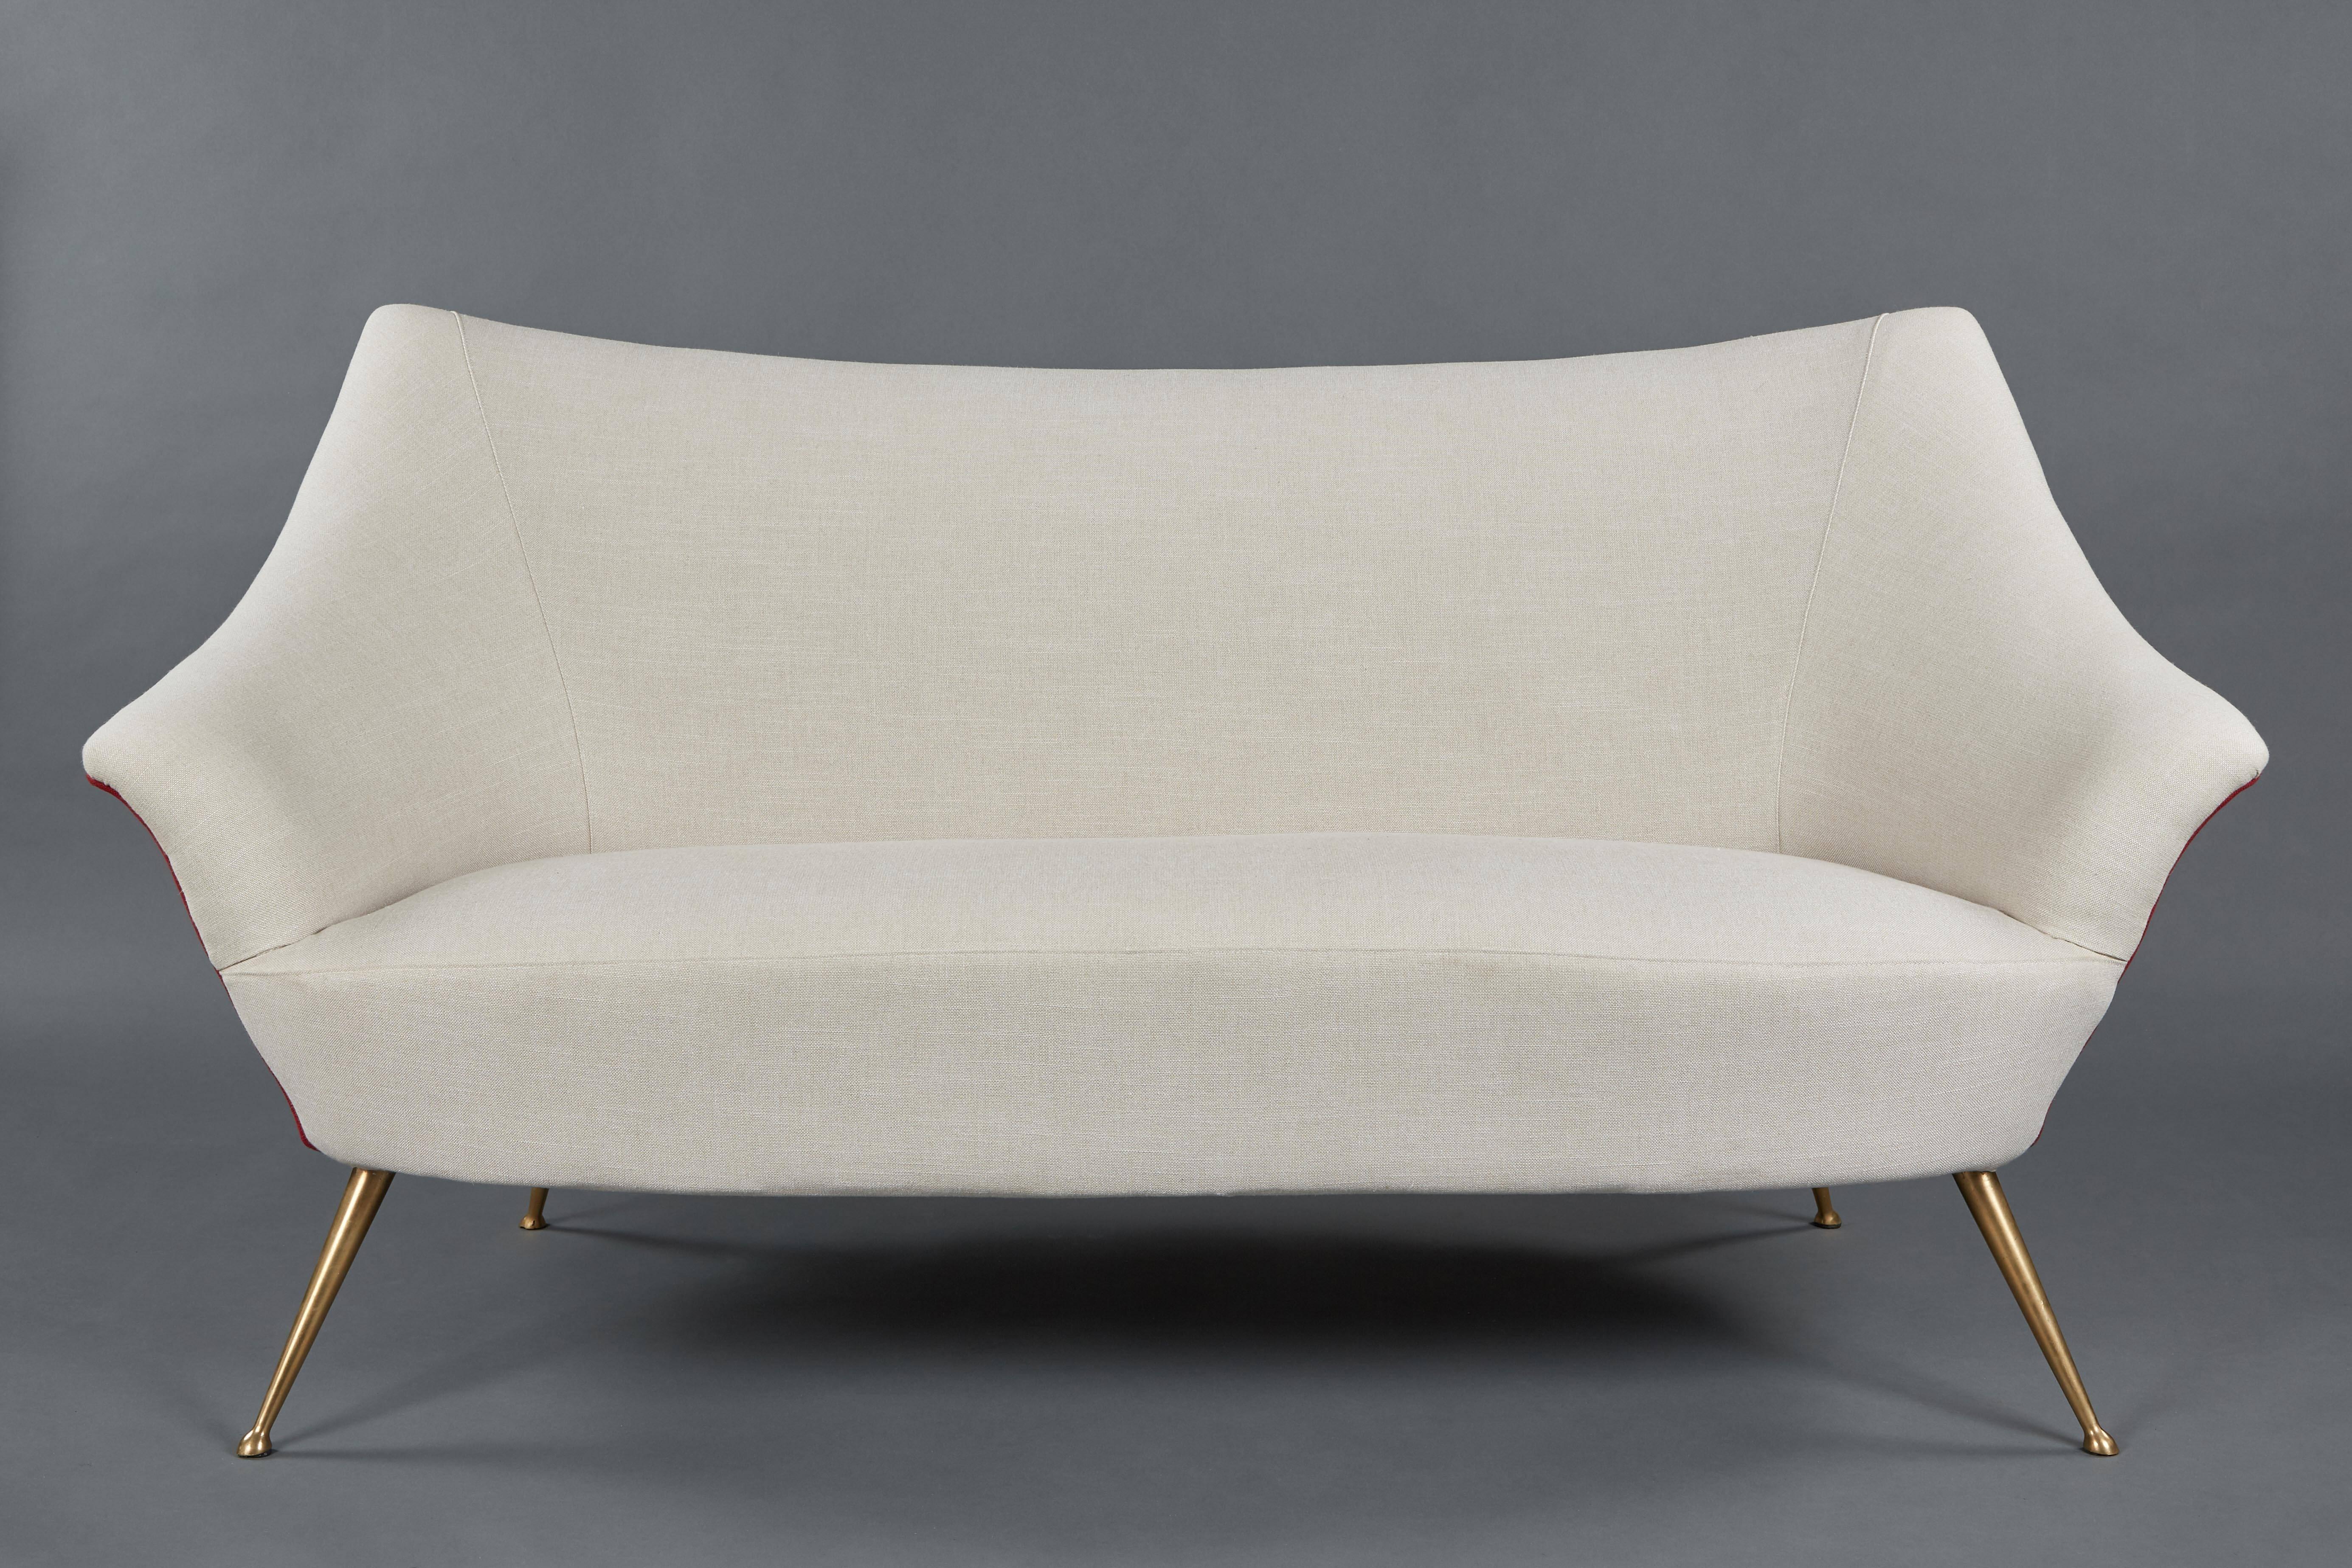 A 1950s, Italian petite sofa and pair of chairs. Suite is newly upholstered in a cream linen with contrasting linen on back and features curvilinear lines with legs gracefully designed in brass.

Dimensions in listing are for sofa. Armchairs